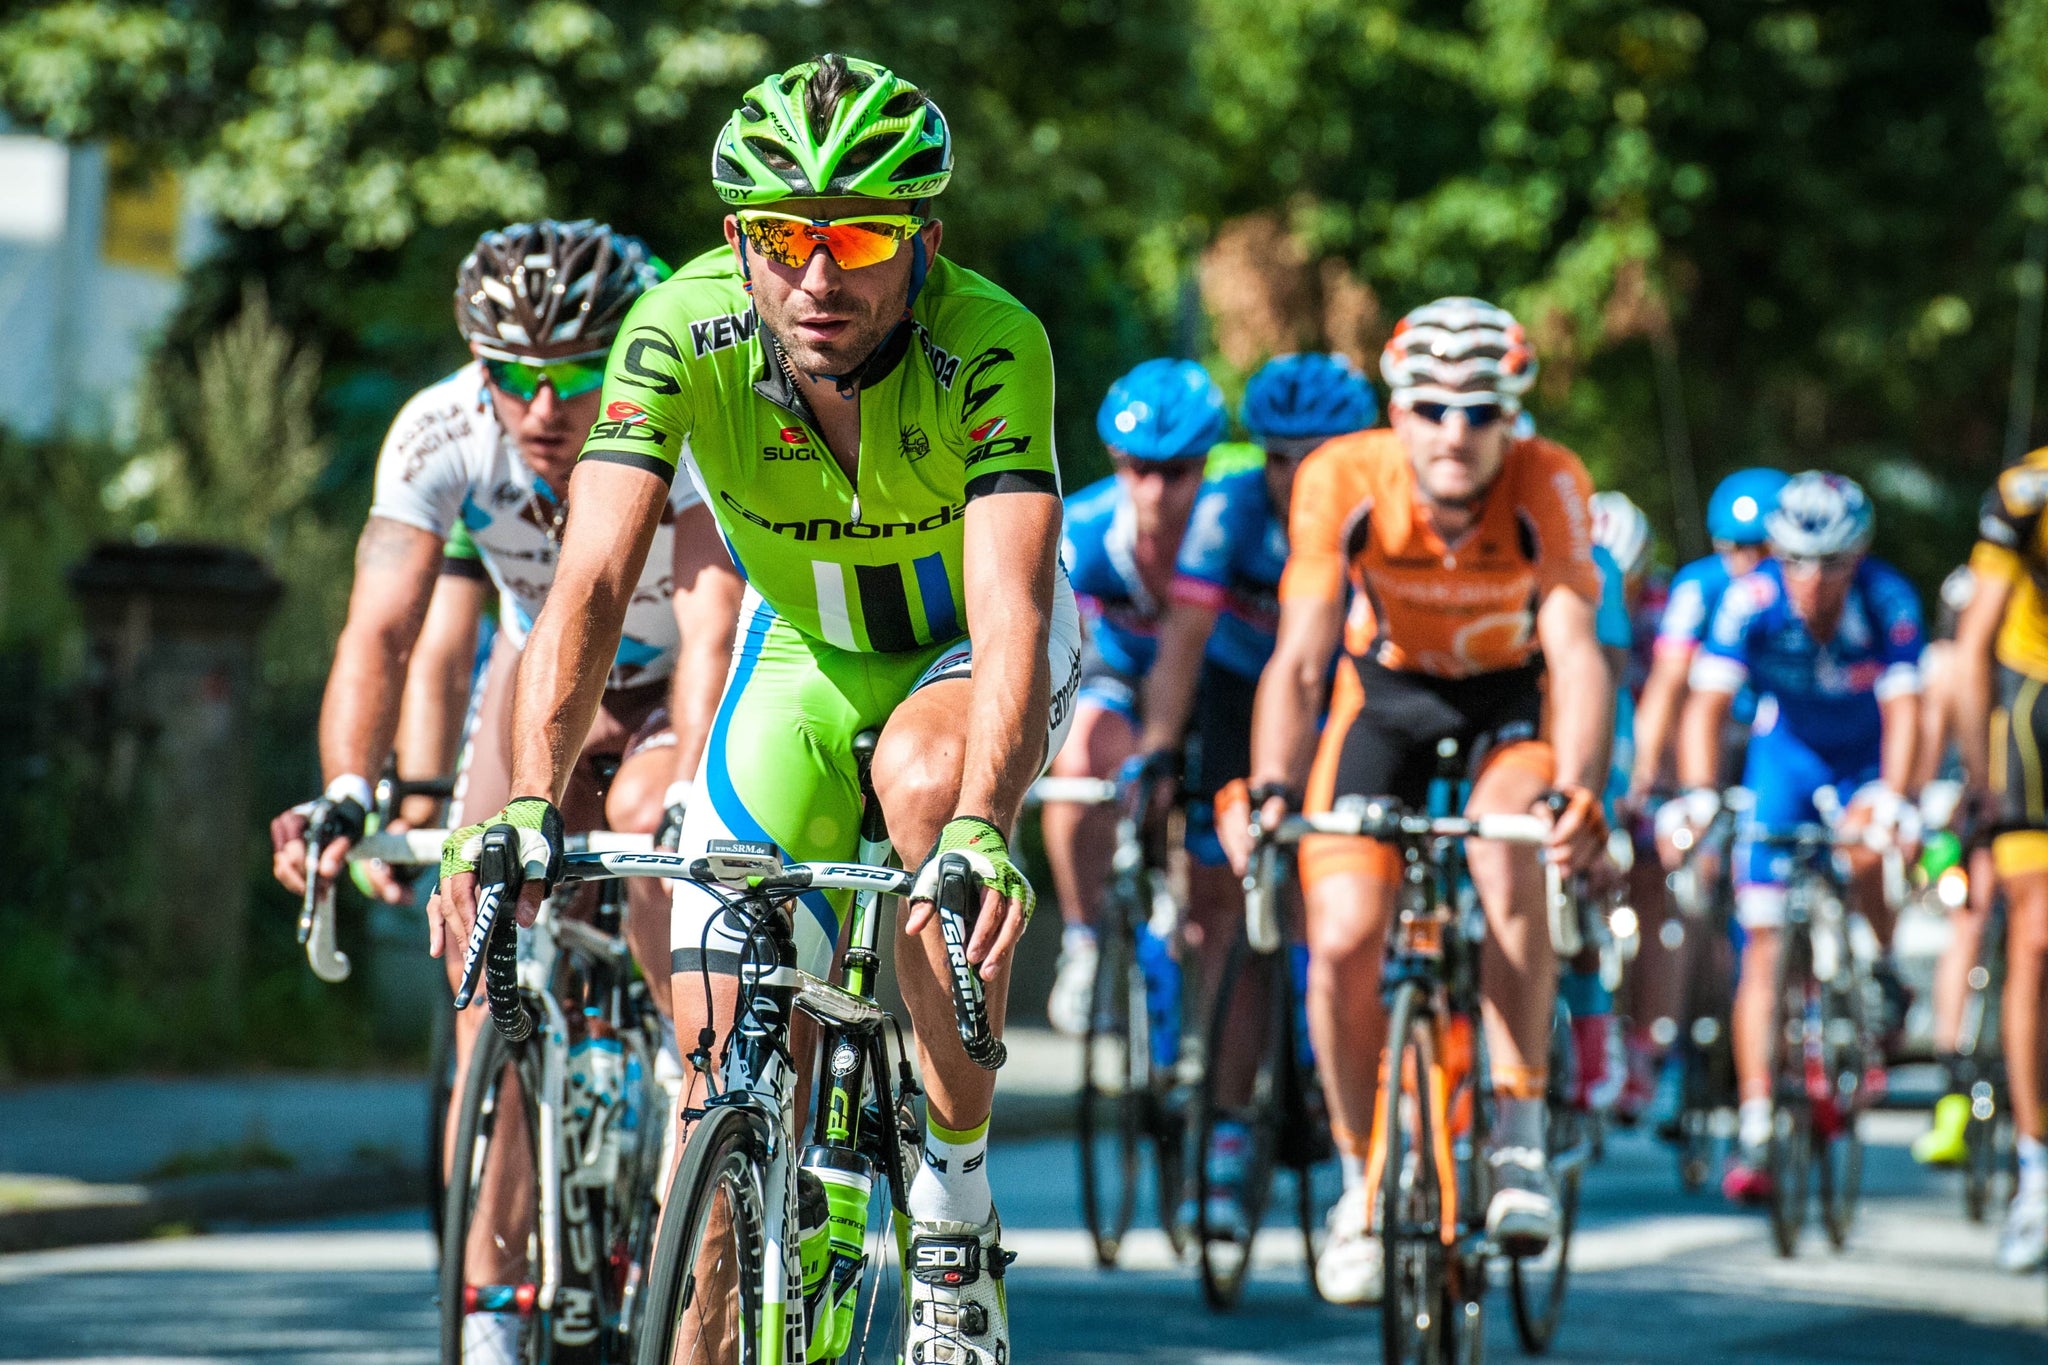 Cyclist racing ahead of the cycling competition — one of the benefits of collagen dairy-free protein for athletes